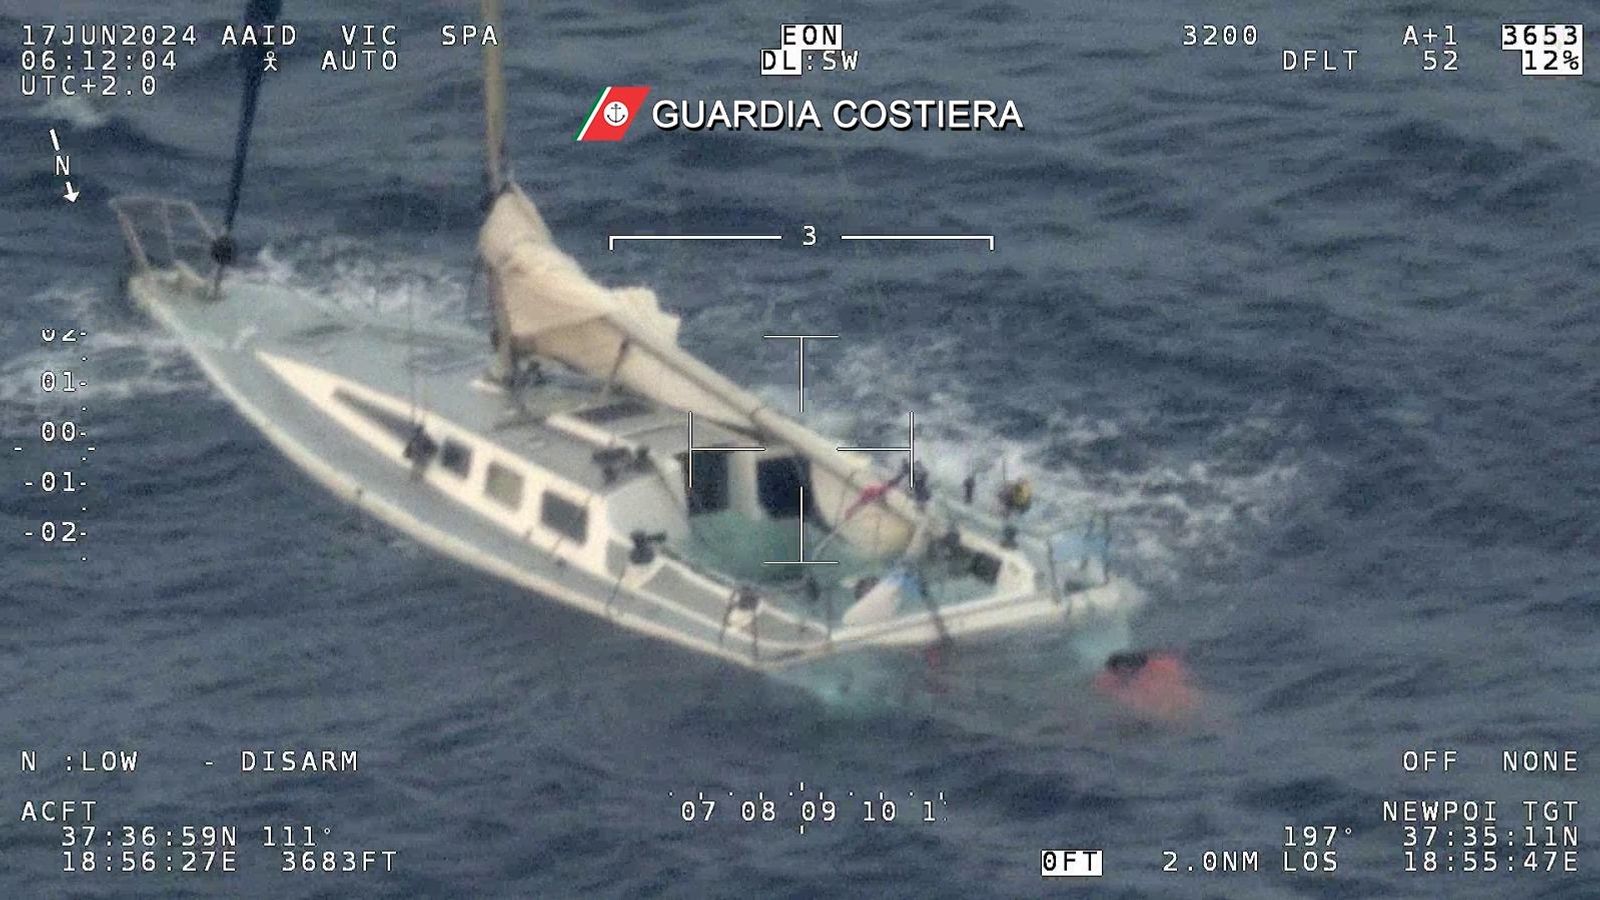 11 people dead and dozens missing after two shipwrecks off coast of Italy